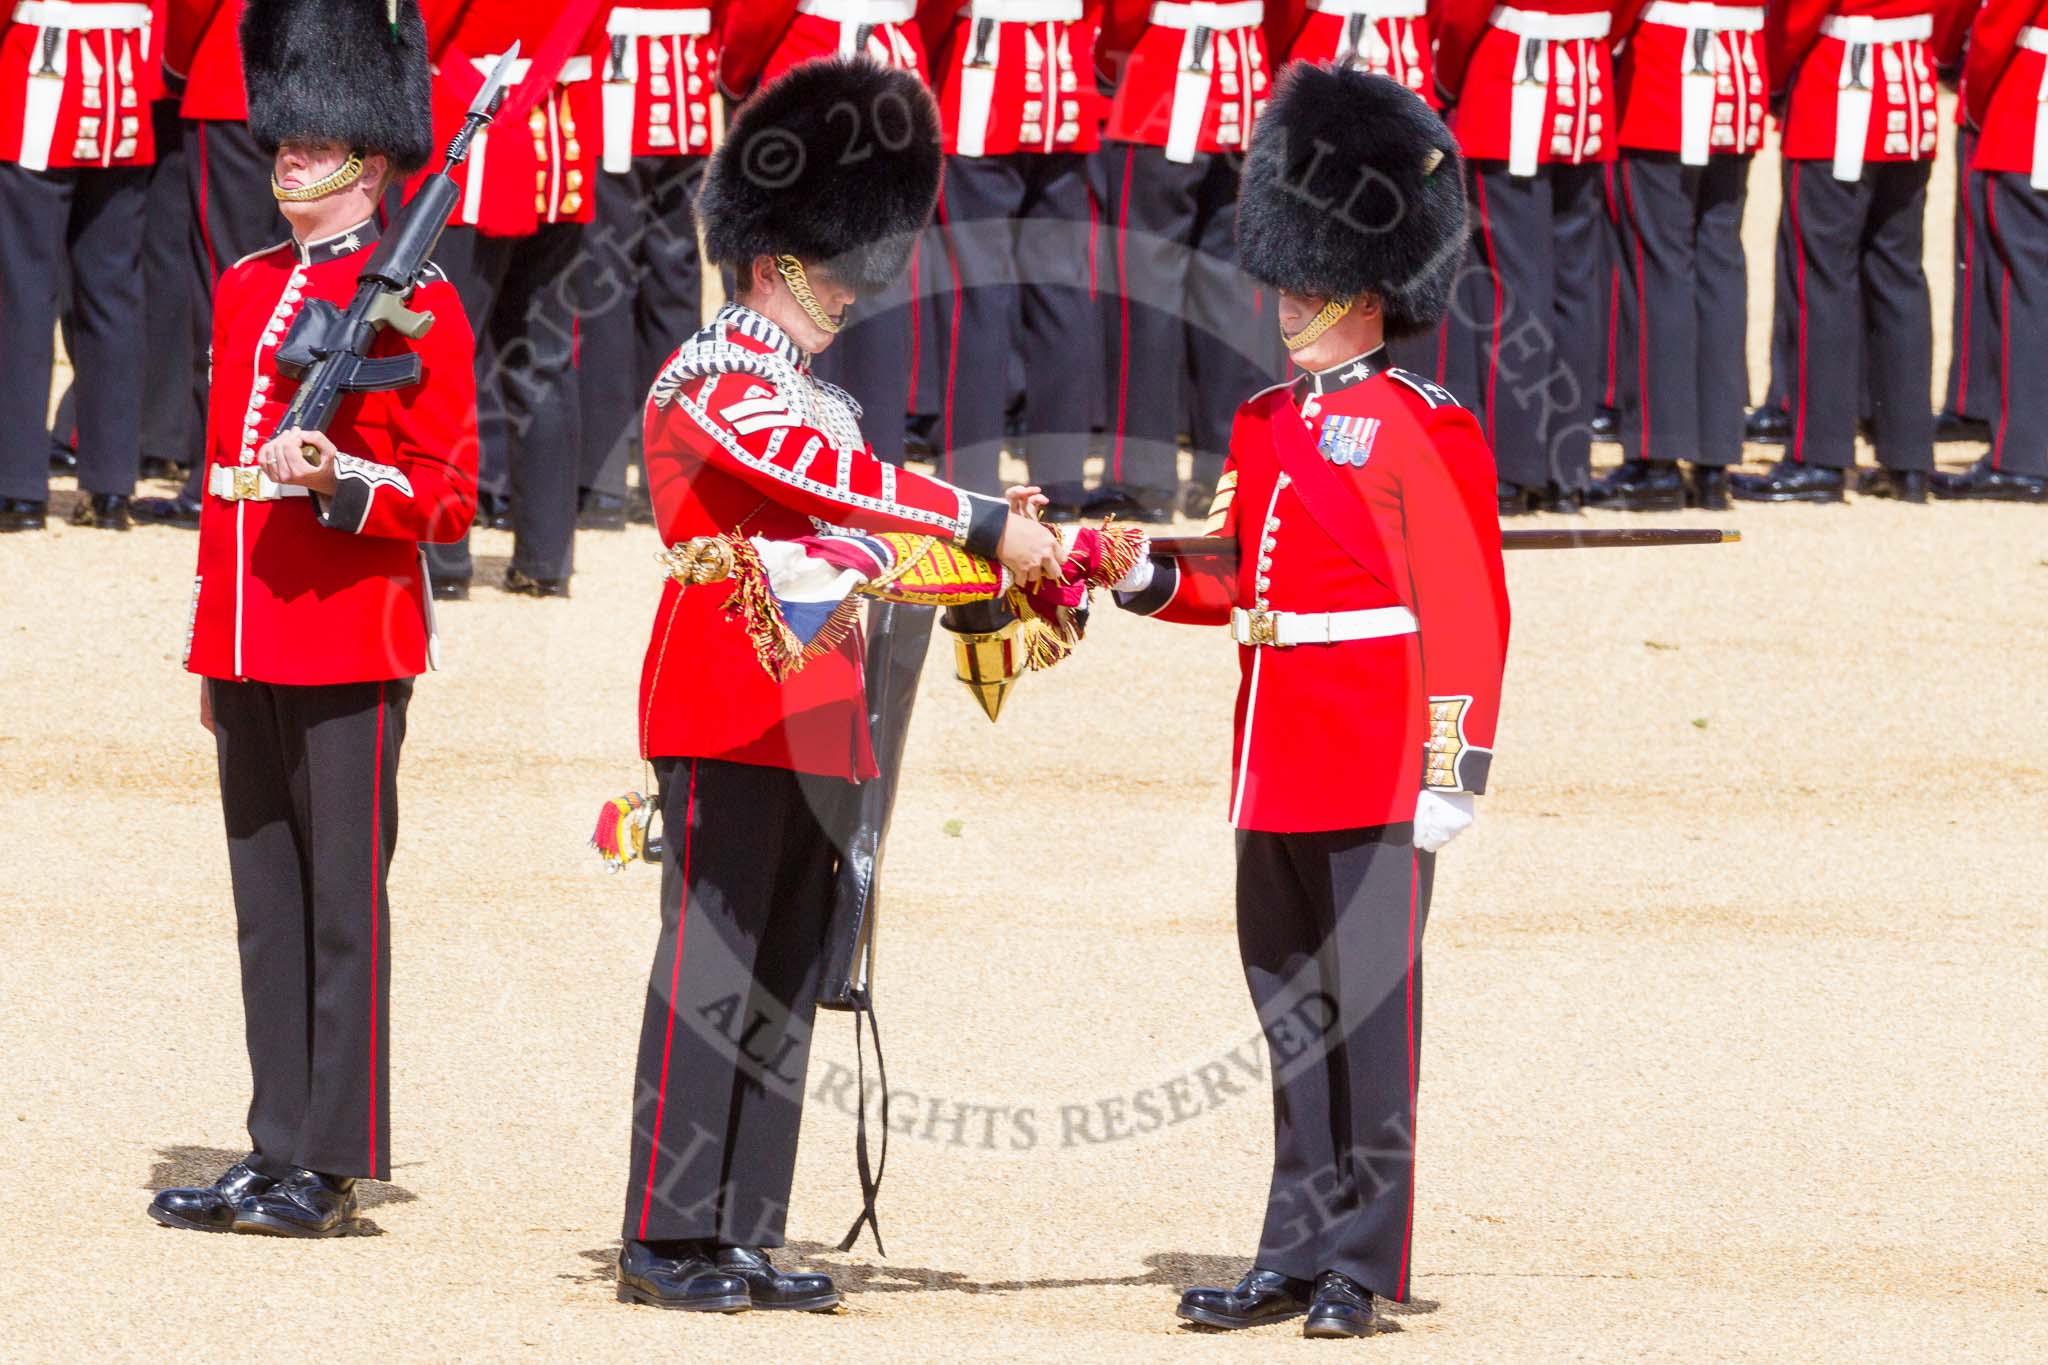 The Colonel's Review 2015.
Horse Guards Parade, Westminster,
London,

United Kingdom,
on 06 June 2015 at 10:35, image #104